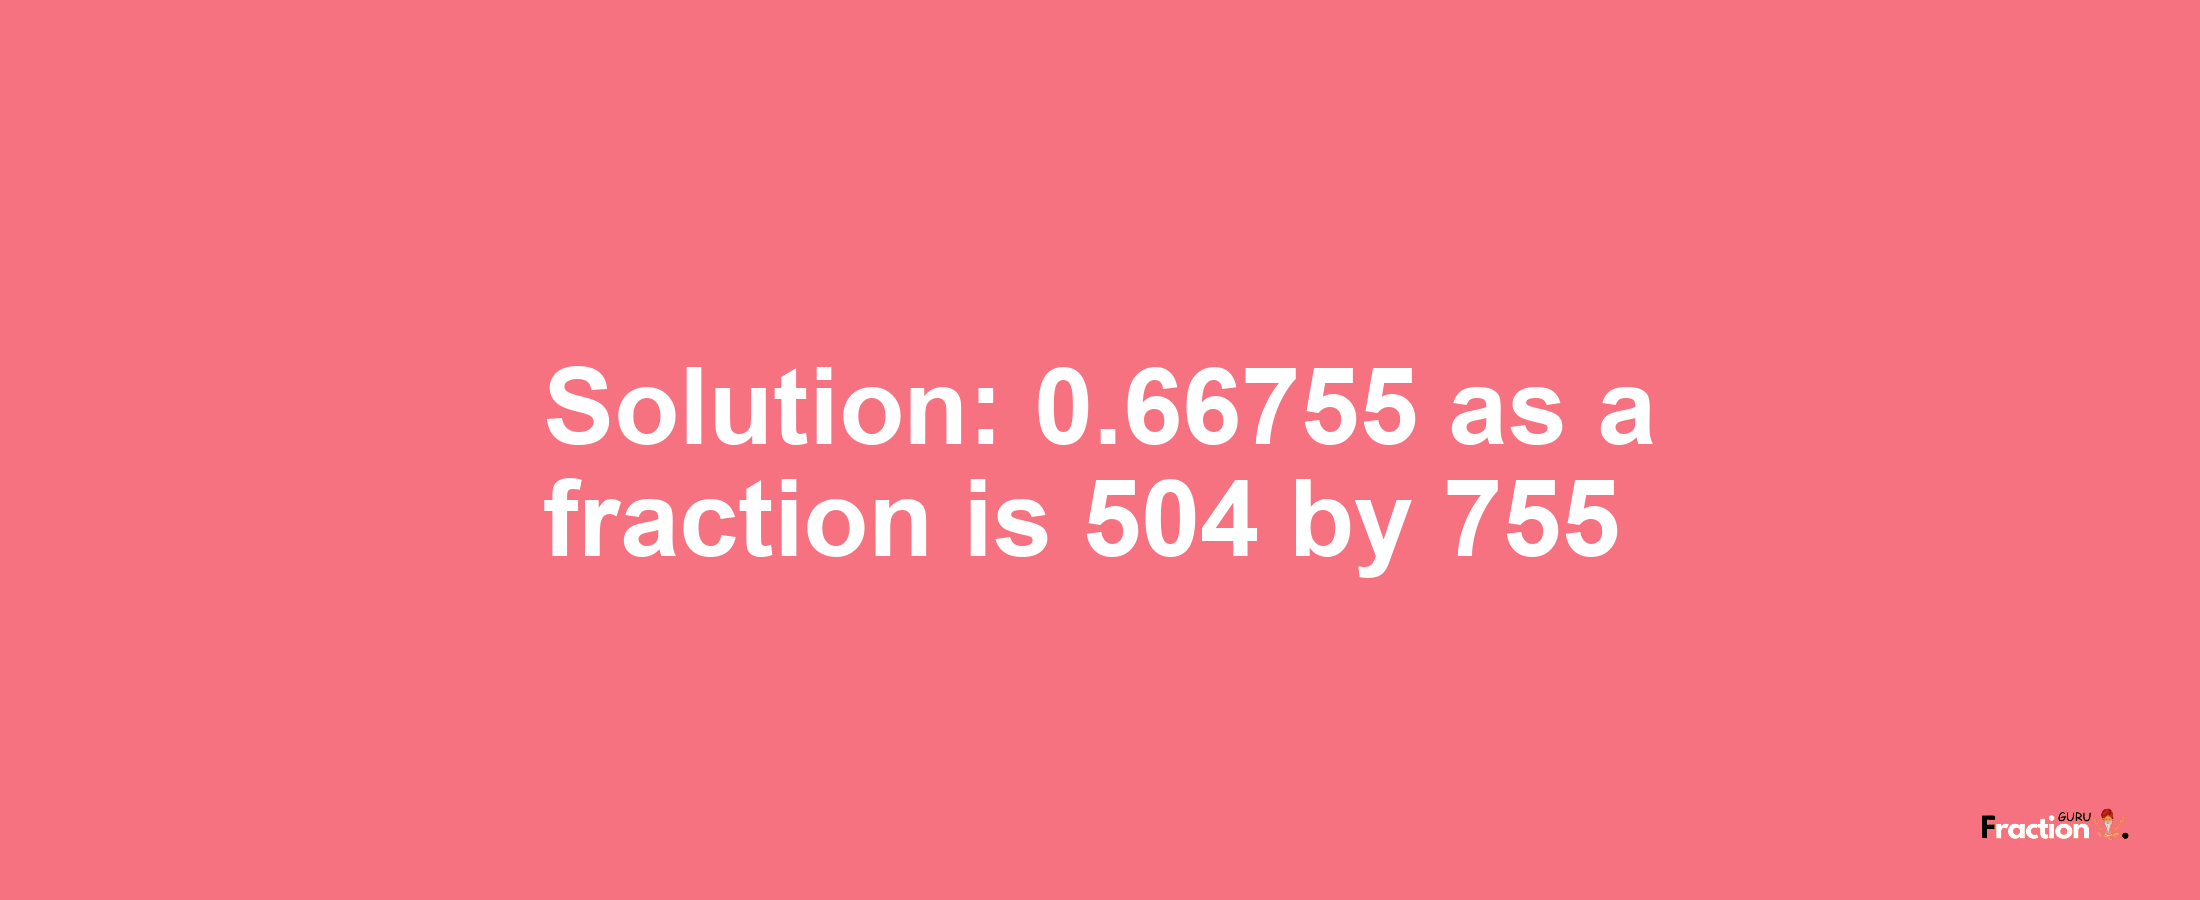 Solution:0.66755 as a fraction is 504/755